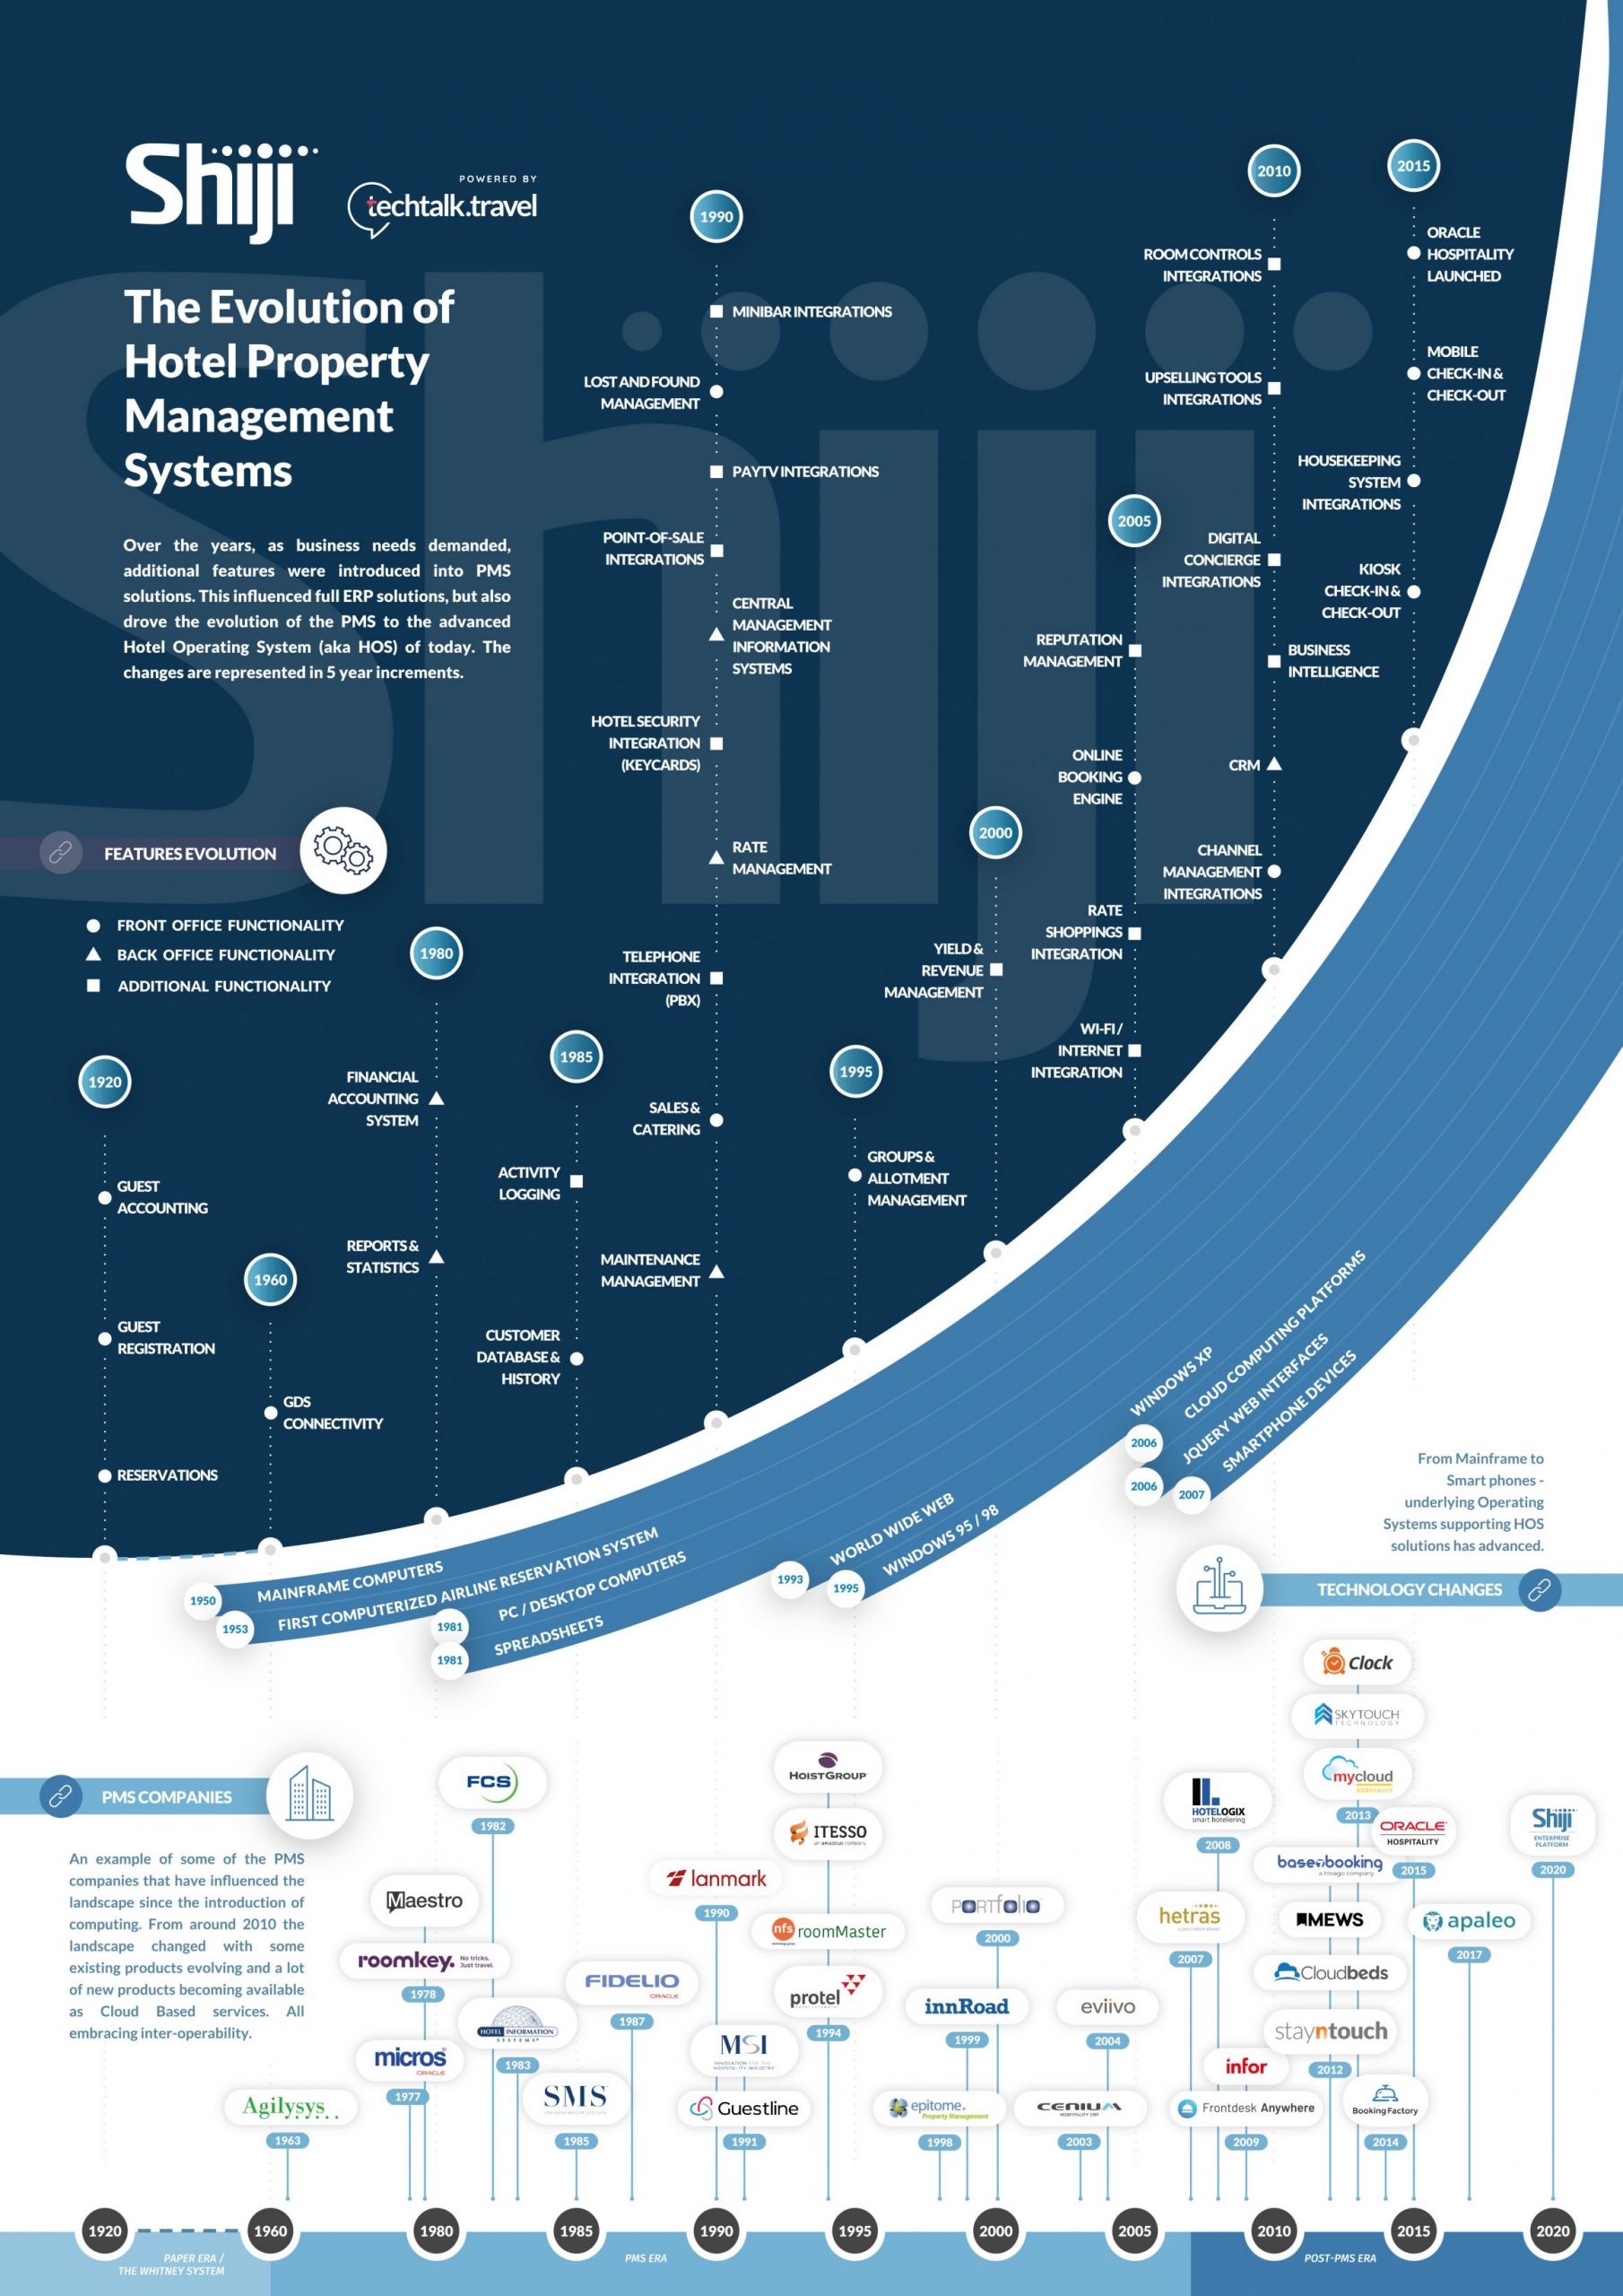 Shiji-Insights-History-of-Hotel-PMS-tech-Infographic-2320x3281-1-scaled.jpg